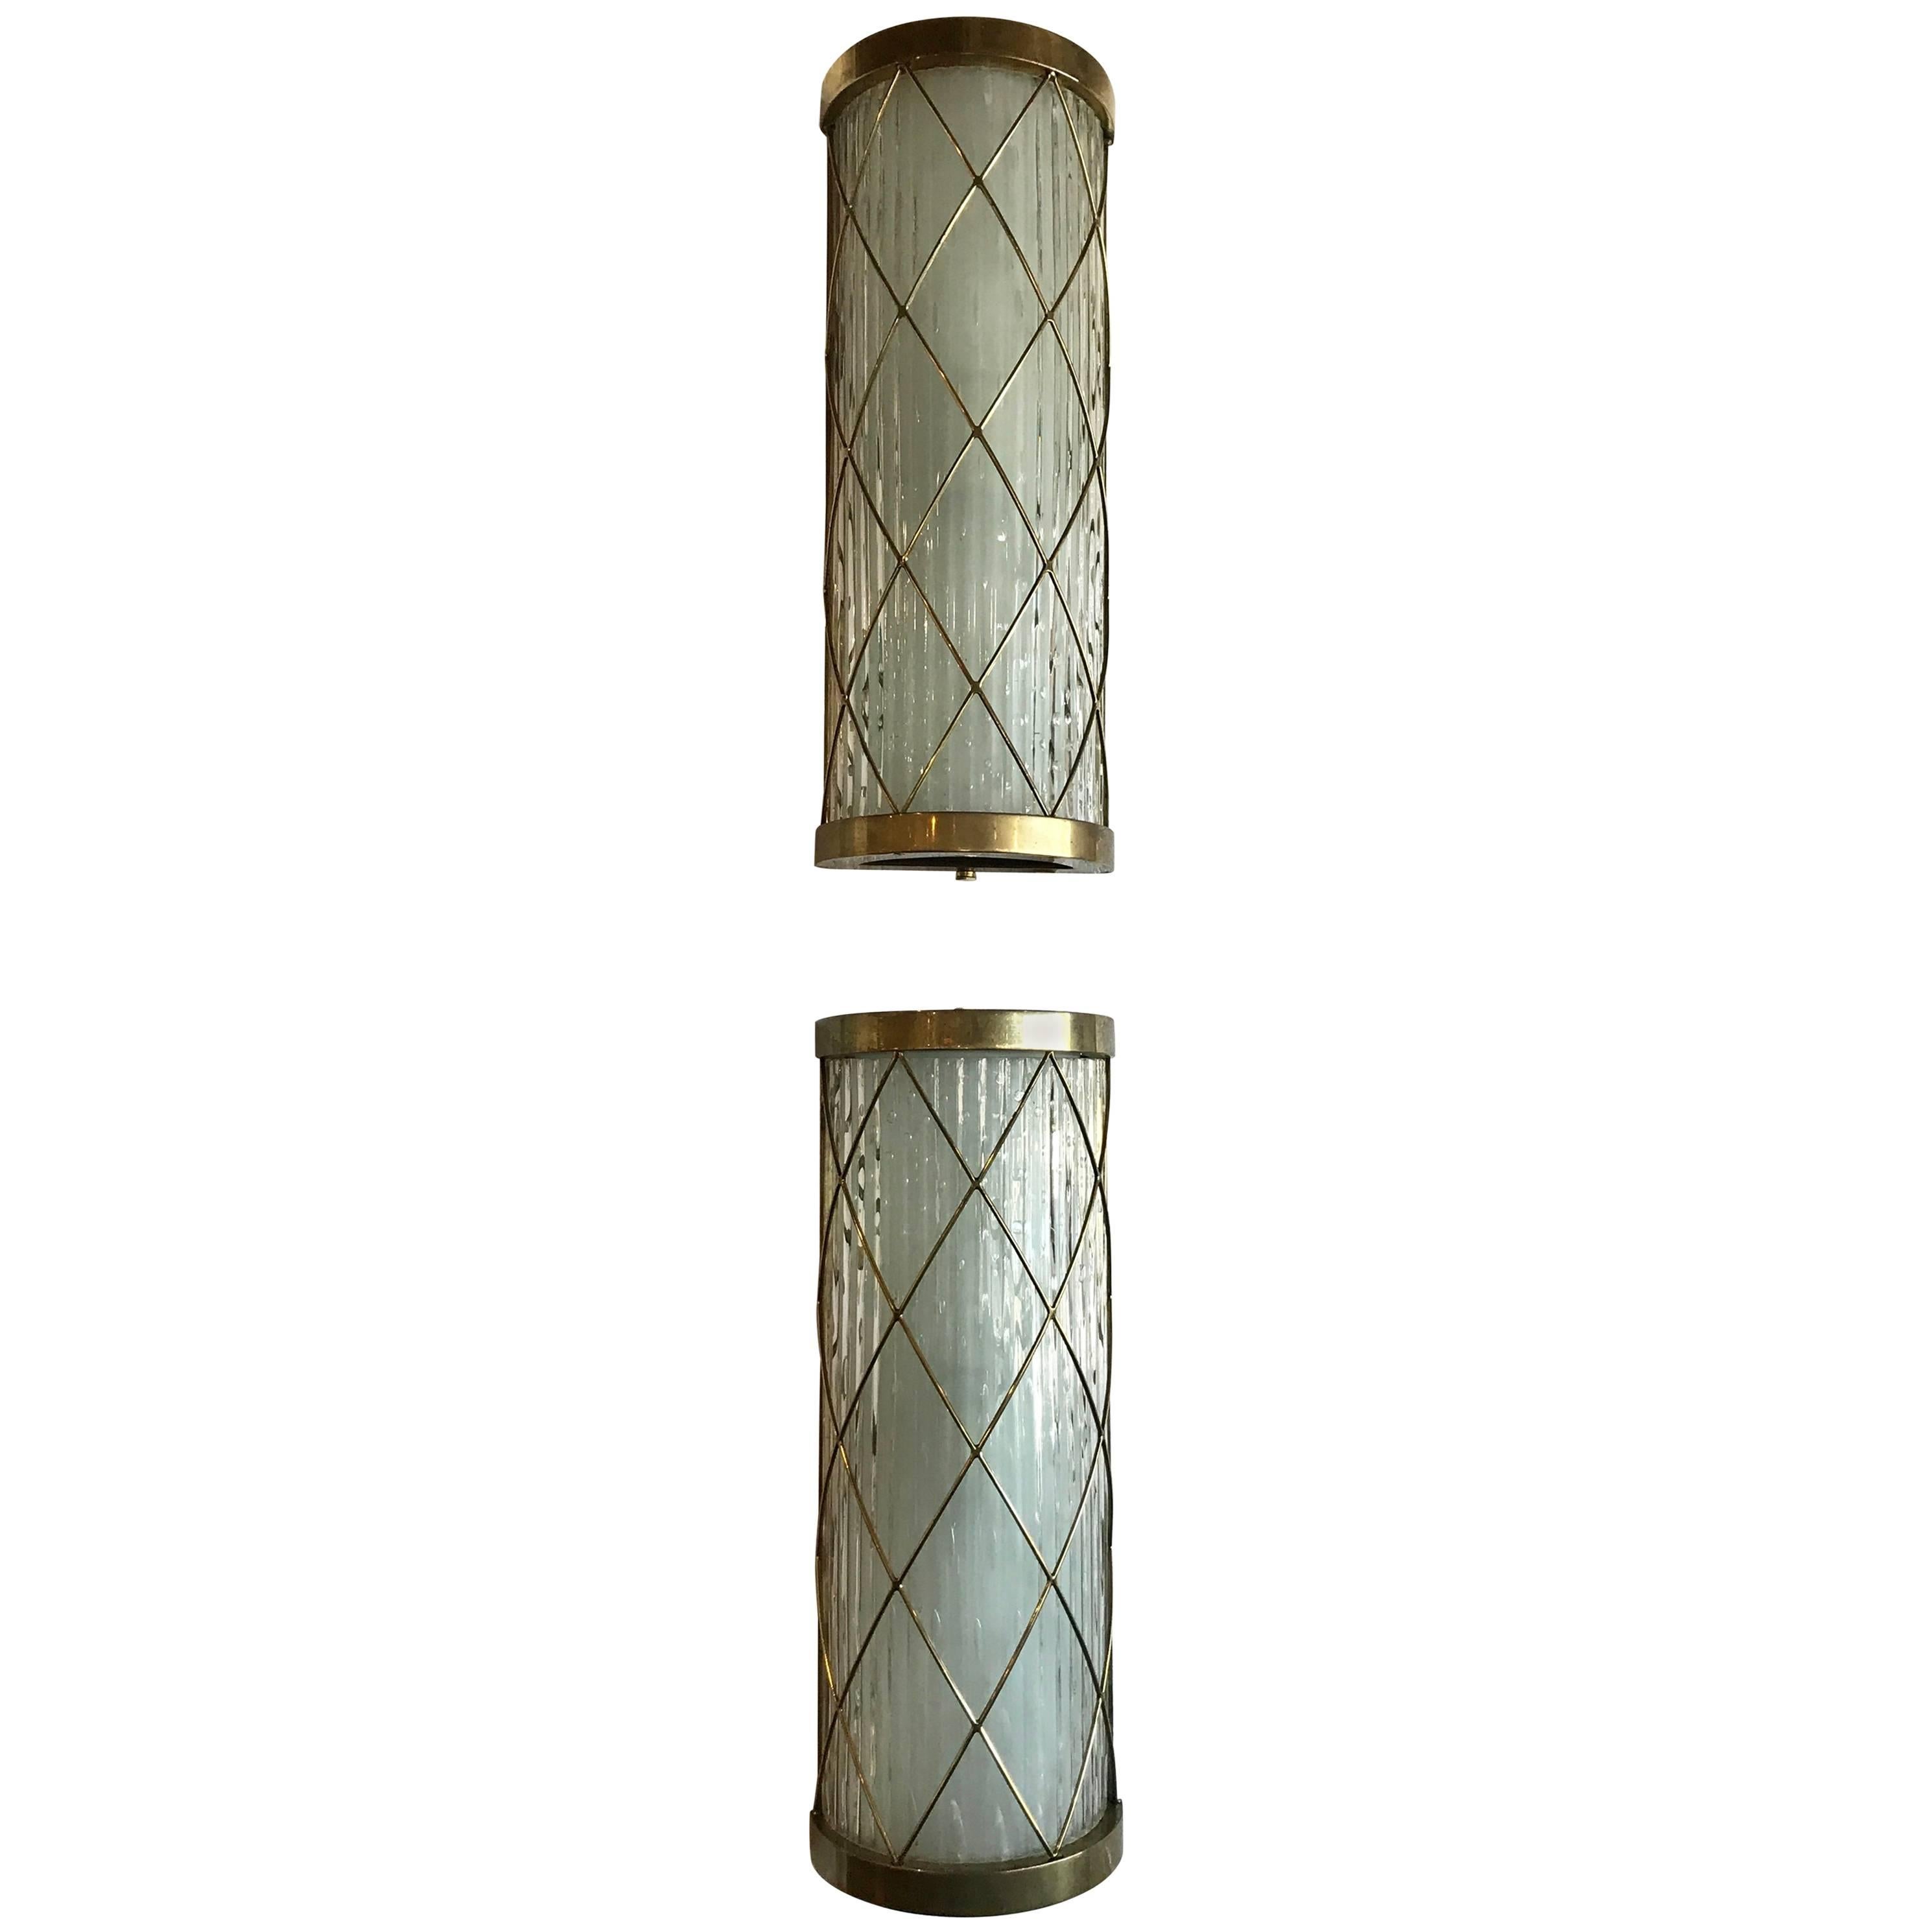 Beautiful Pair of Wall-Mounted Brass and Glass Sconces